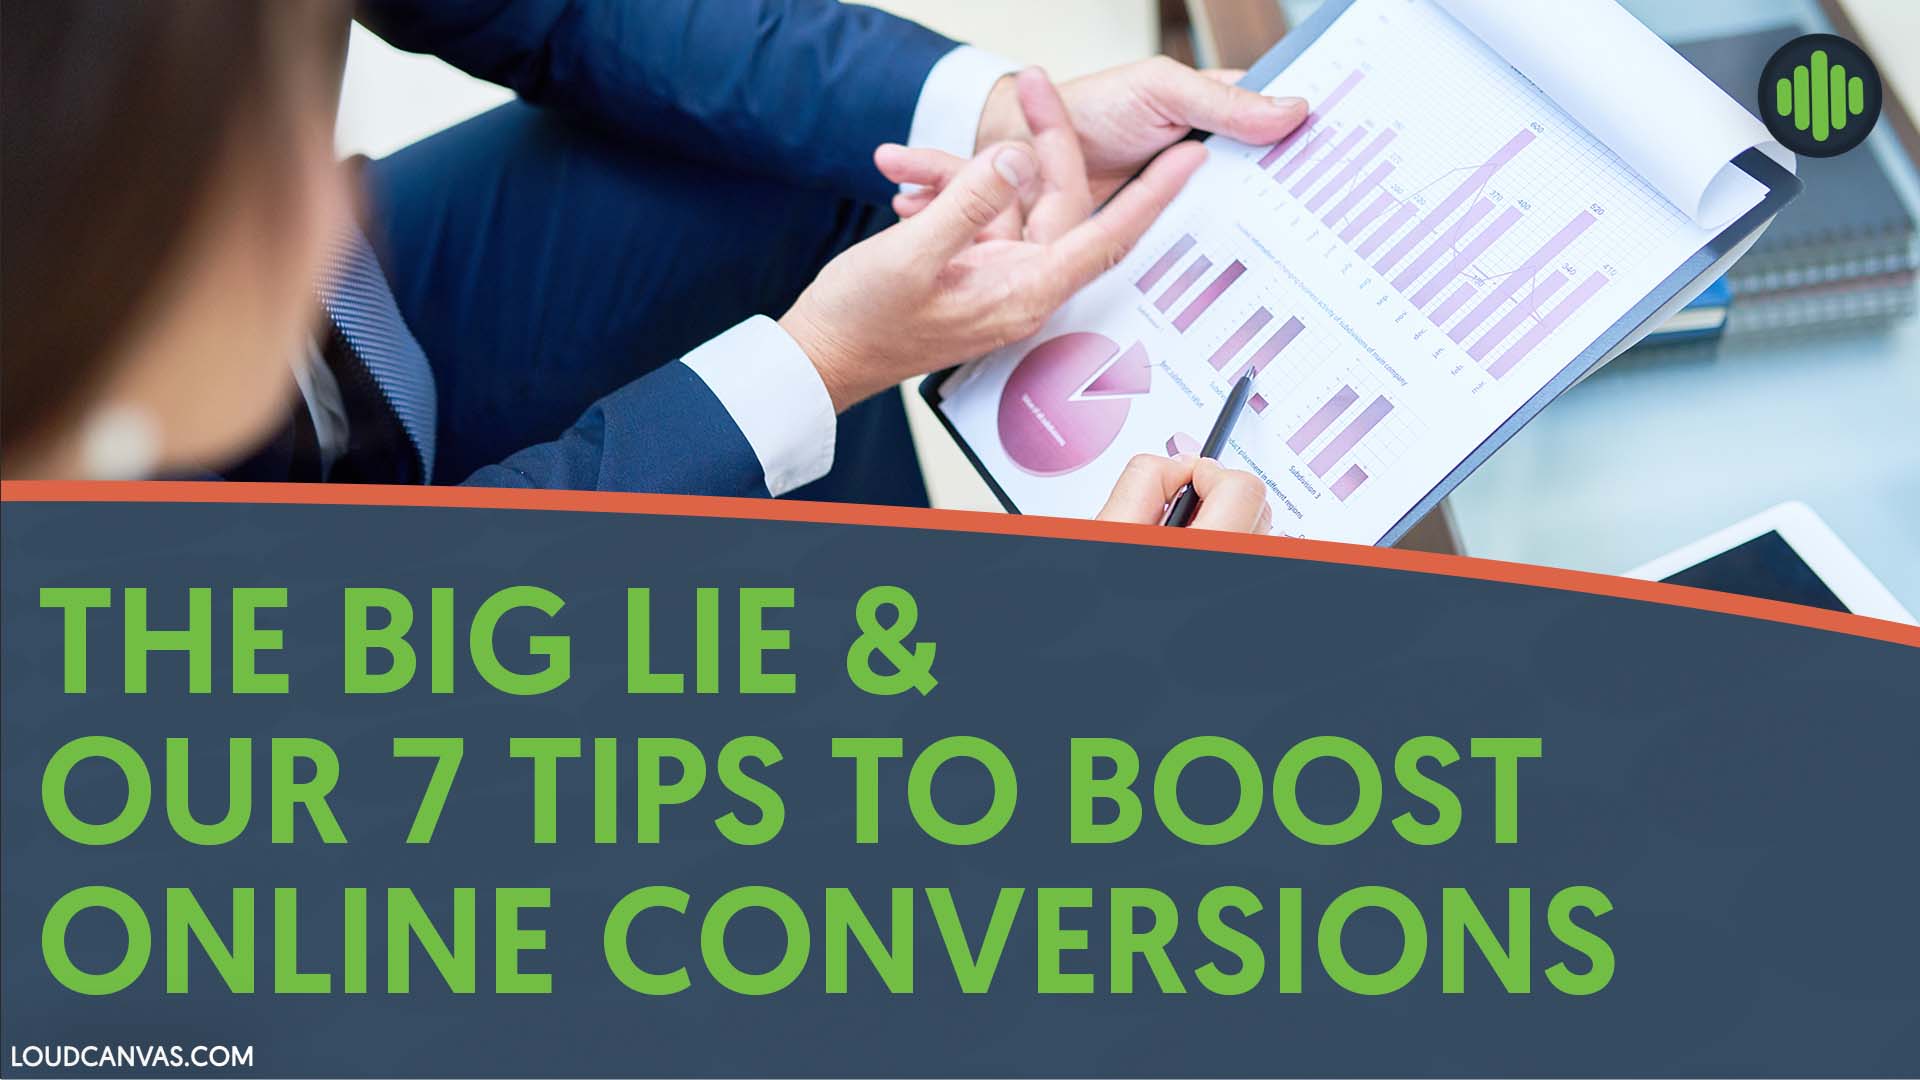 THE BIG LIE Your Website Tells You and Our 7 Tips To Boost Online Conversions 